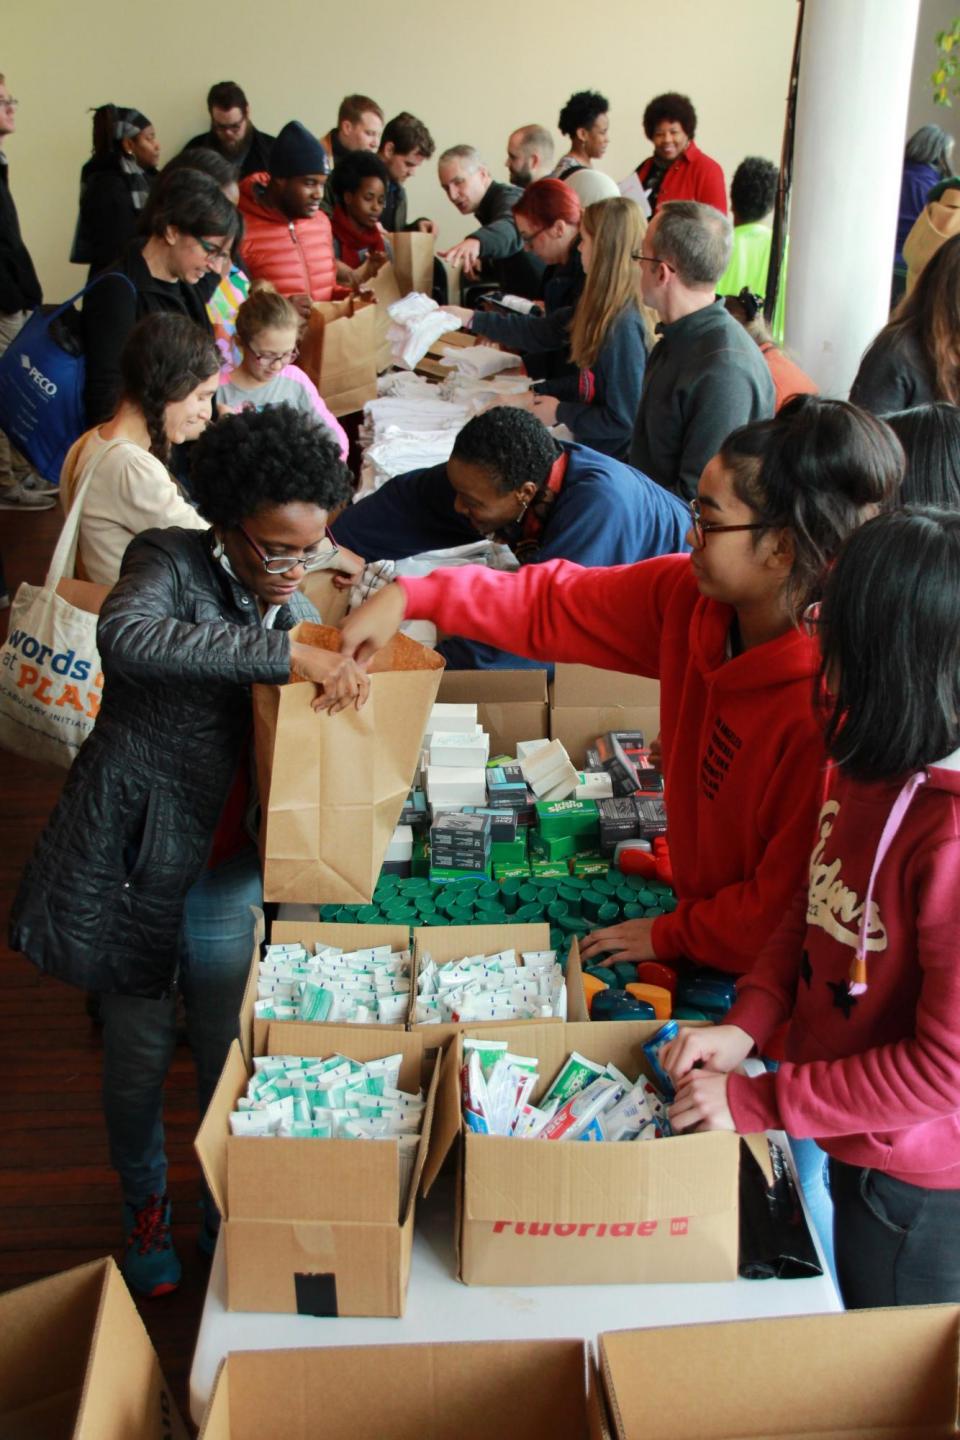 A large group of people standing around a long table, working on an assembly line putting hygiene items into brown paper bags.